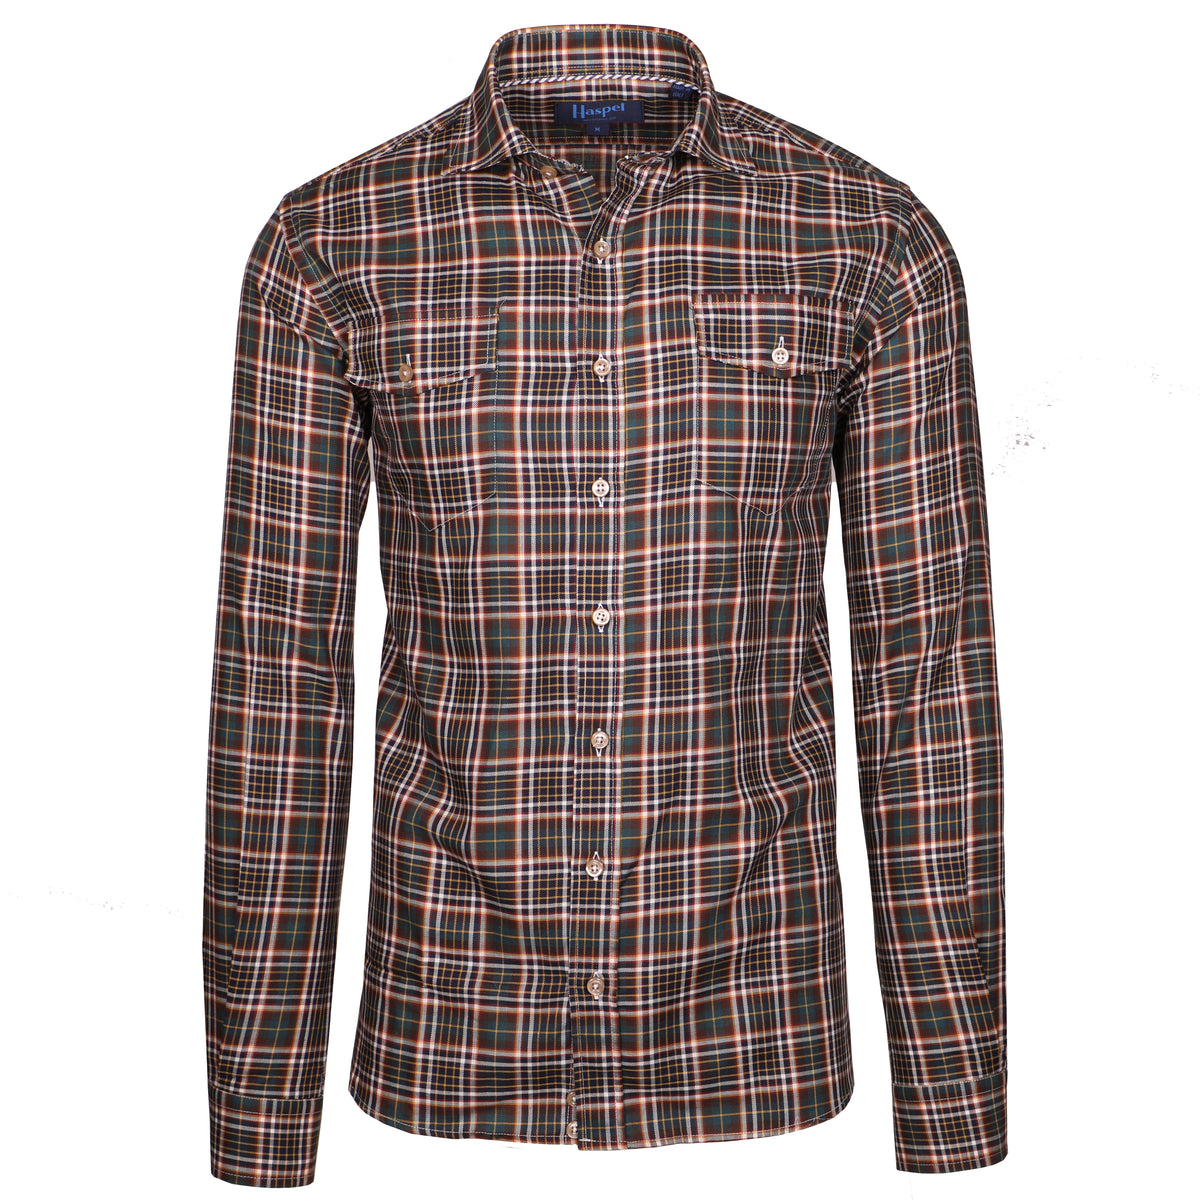 *** FINAL SALE *** Earhart Pocket Forest Green Plaid